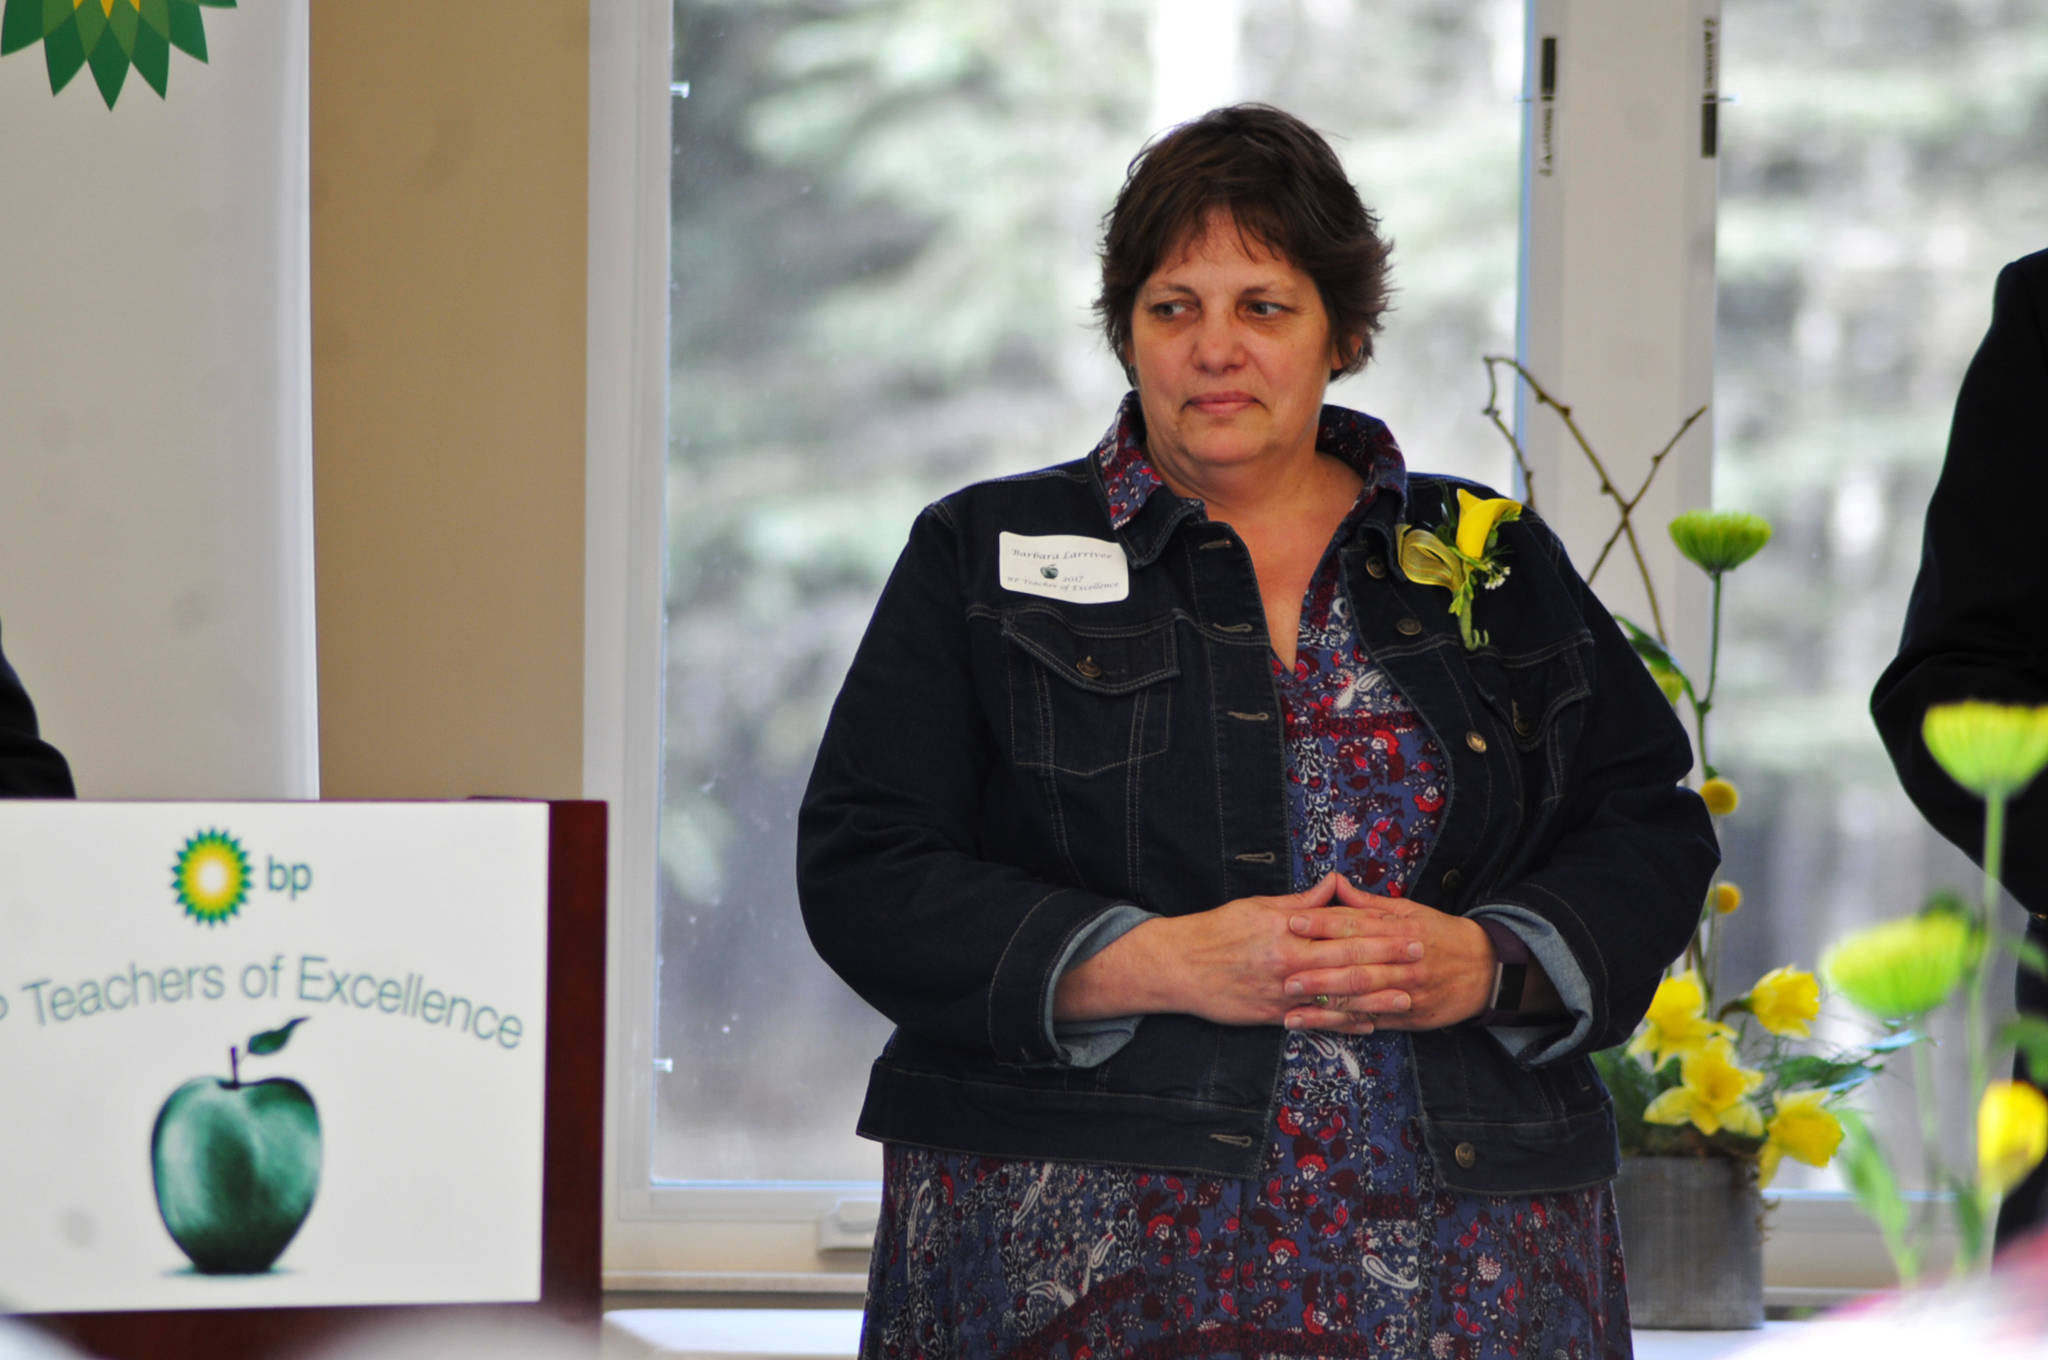 Bobbie Larrivee, a special education teacher at West Homer High School, waits to receive a certificate honoring her as one of the 2017 BP Teachers of Excellence at an awards banquet Thursday, April 27, 2017 in Soldotna, Alaska. BP recognized five teachers from around the Kenai Peninsula Borough School District for excellence in teaching with certificates, $500 gift cards and $500 donations to their schools. (Elizabeth Earl/Peninsula Clarion)